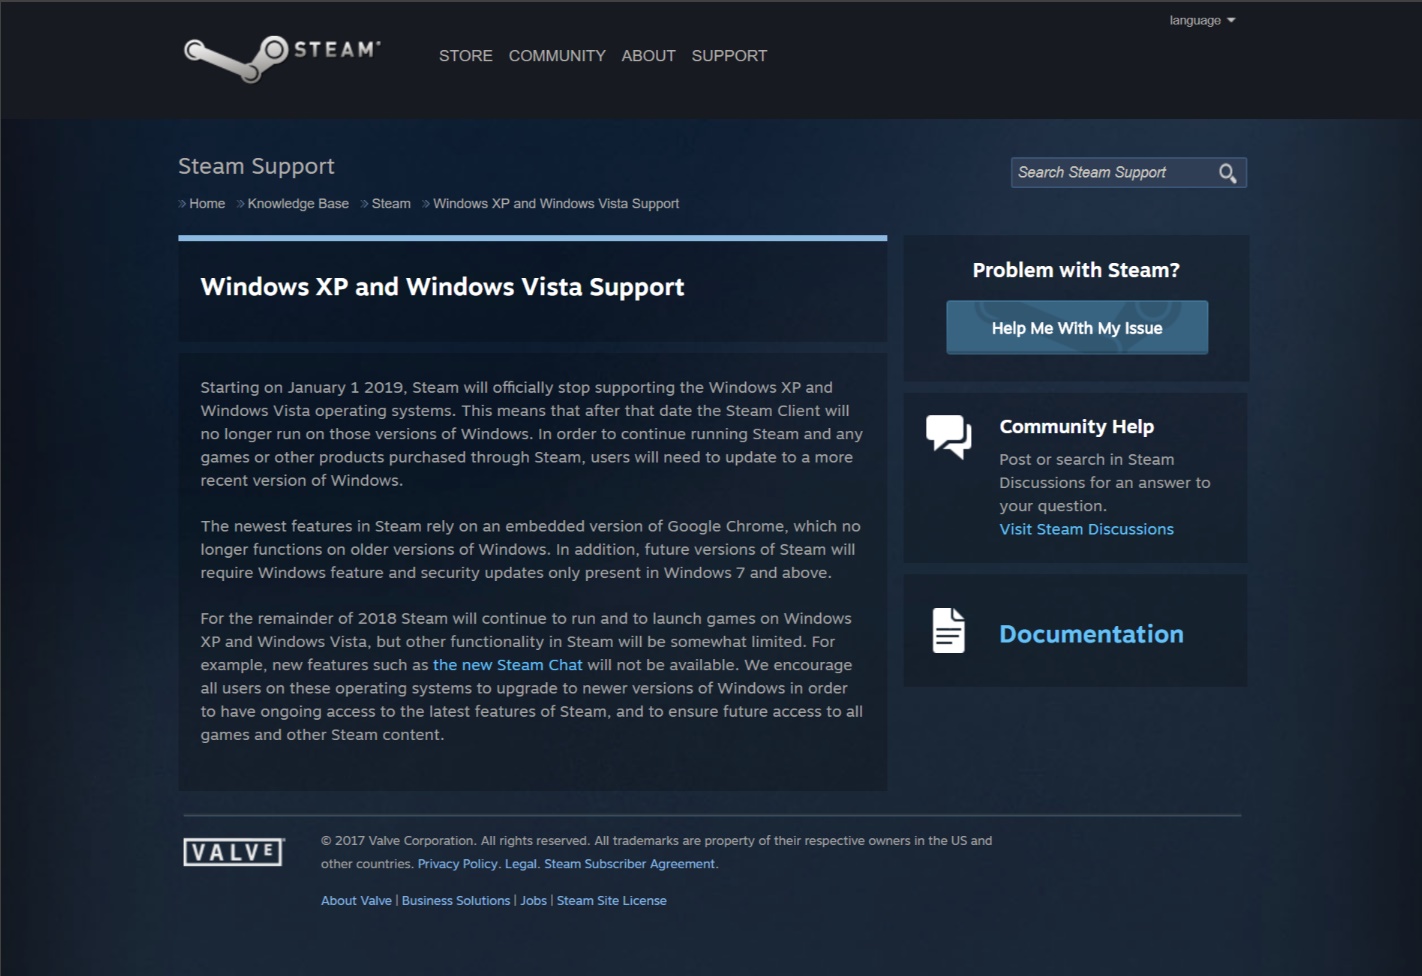 Still using Windows XP? Steam support is the next big thing on its way out